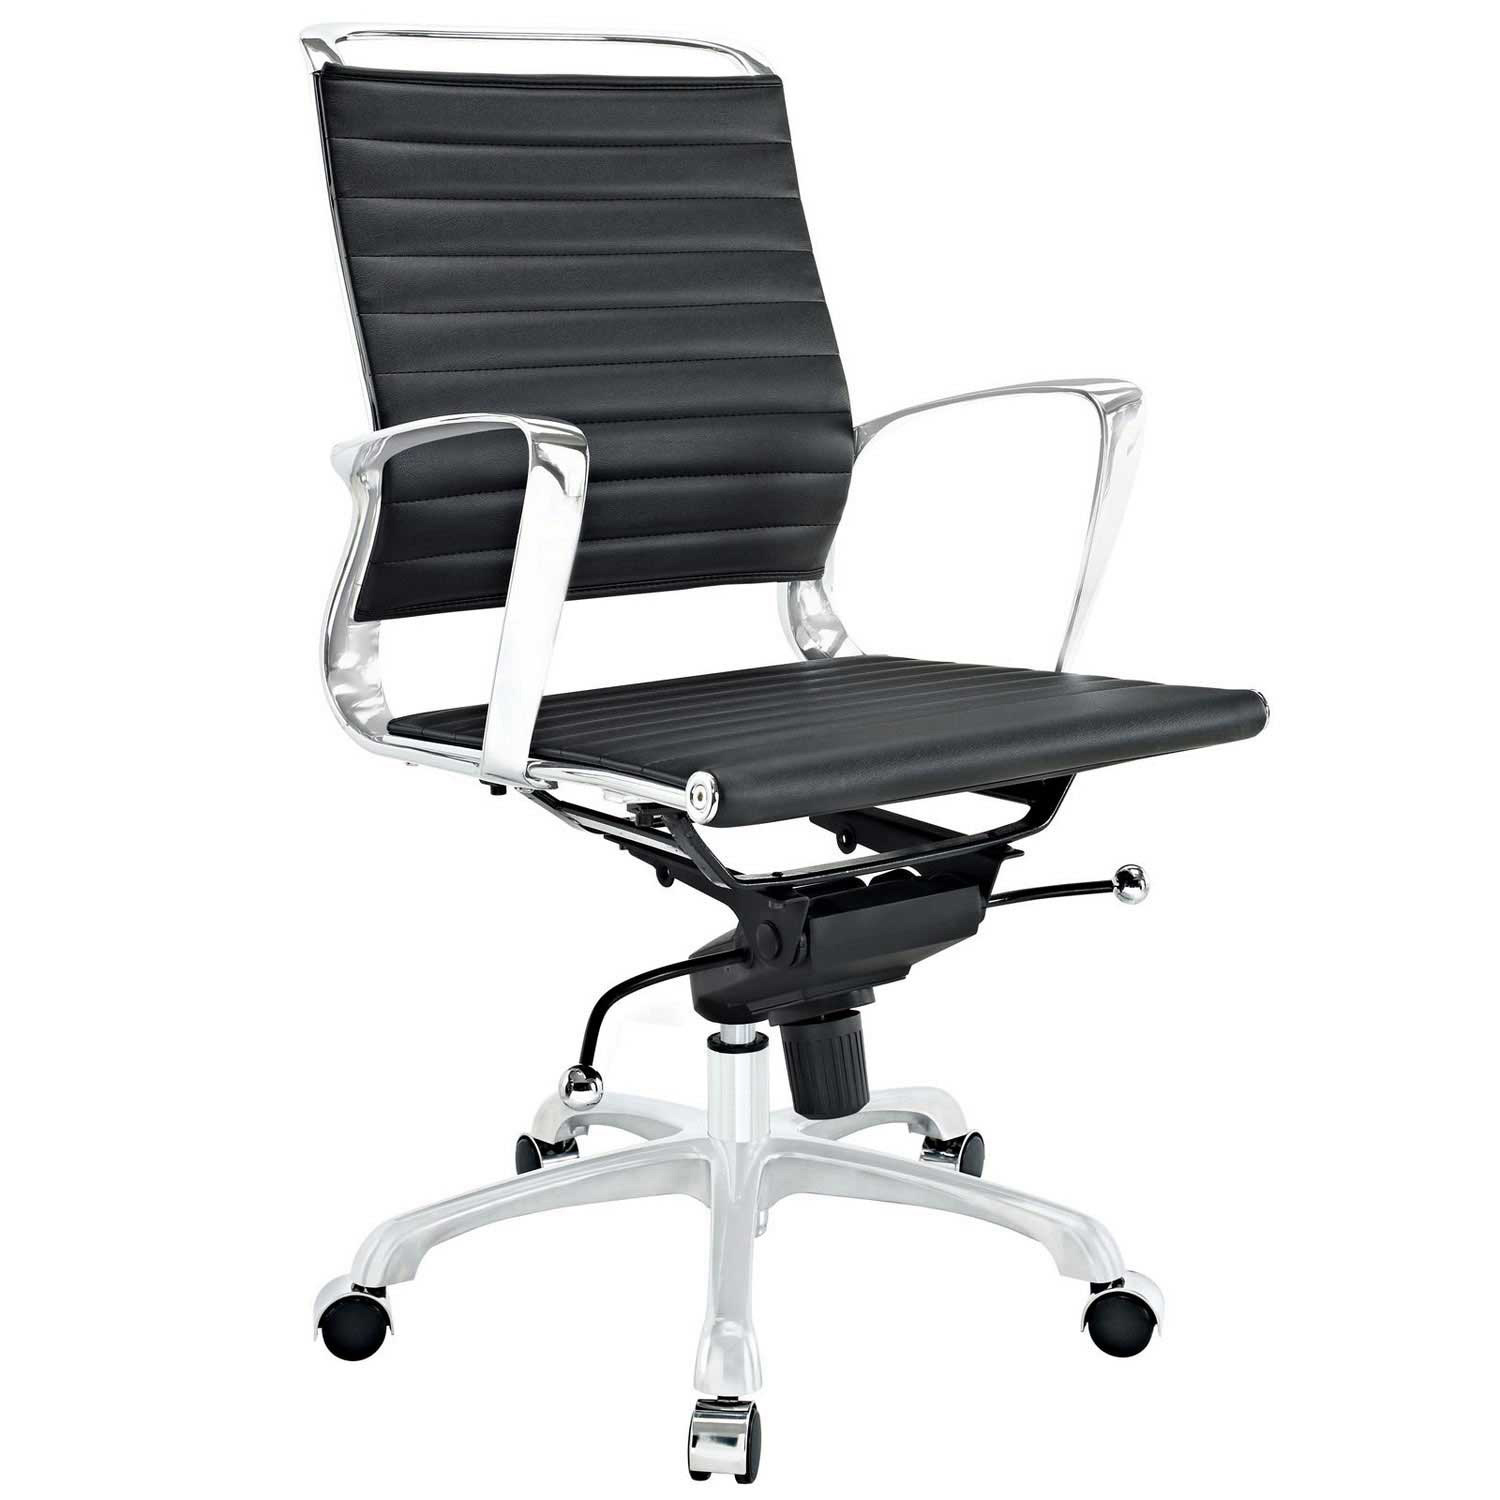 Modway Tempo Mid Back Office Chair - Black